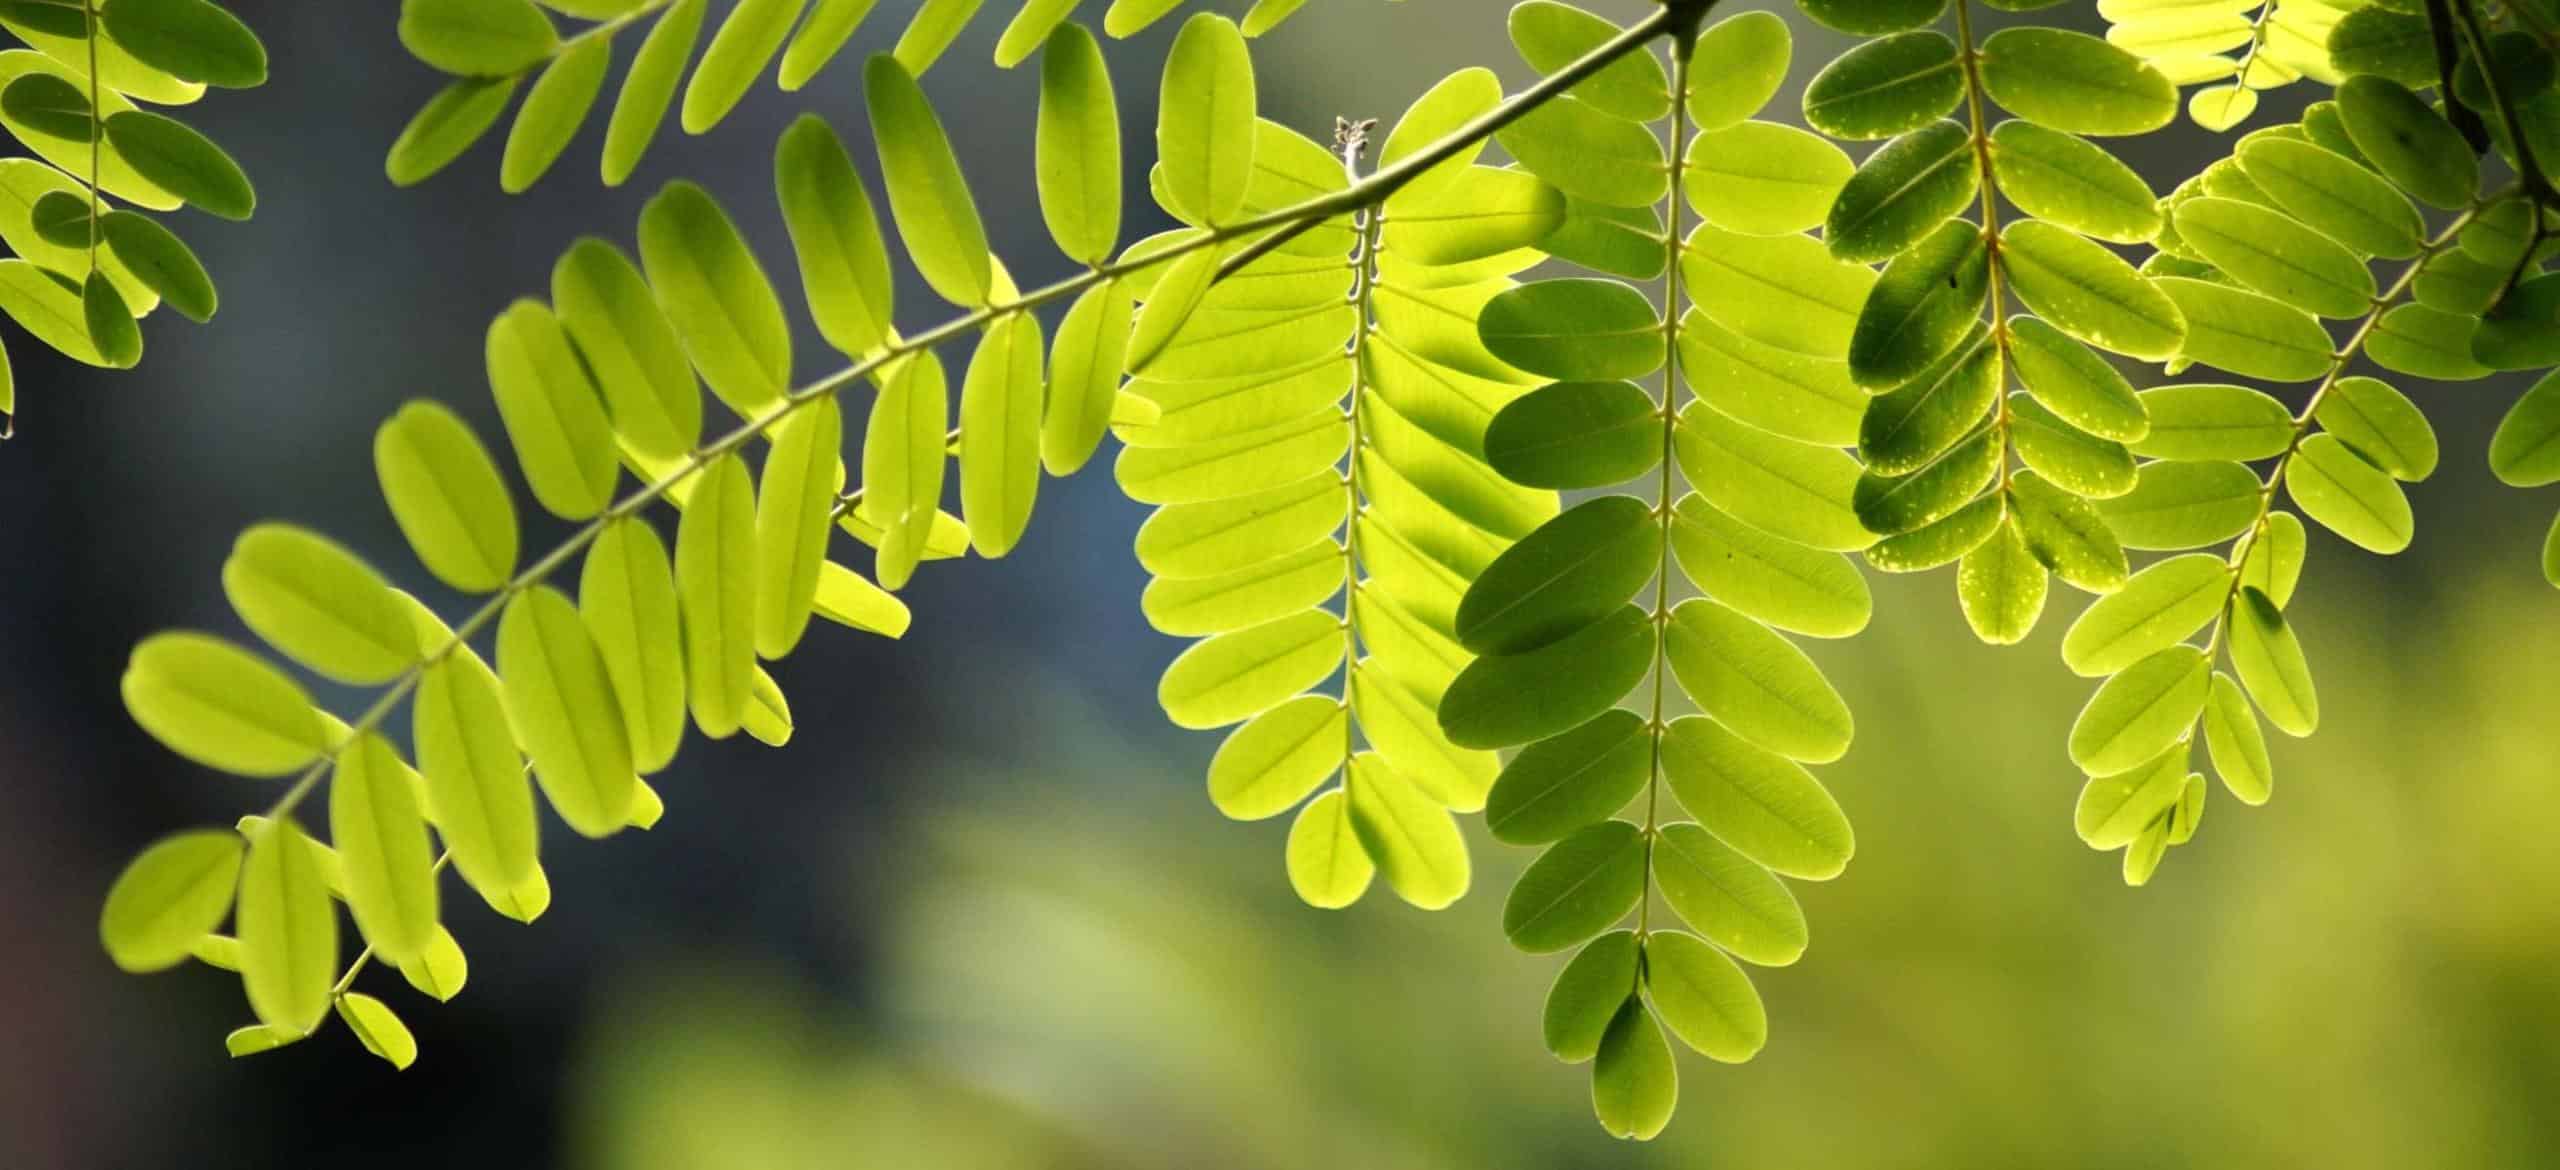 acacia tree: planting, care and pruning of this towering shade-giver